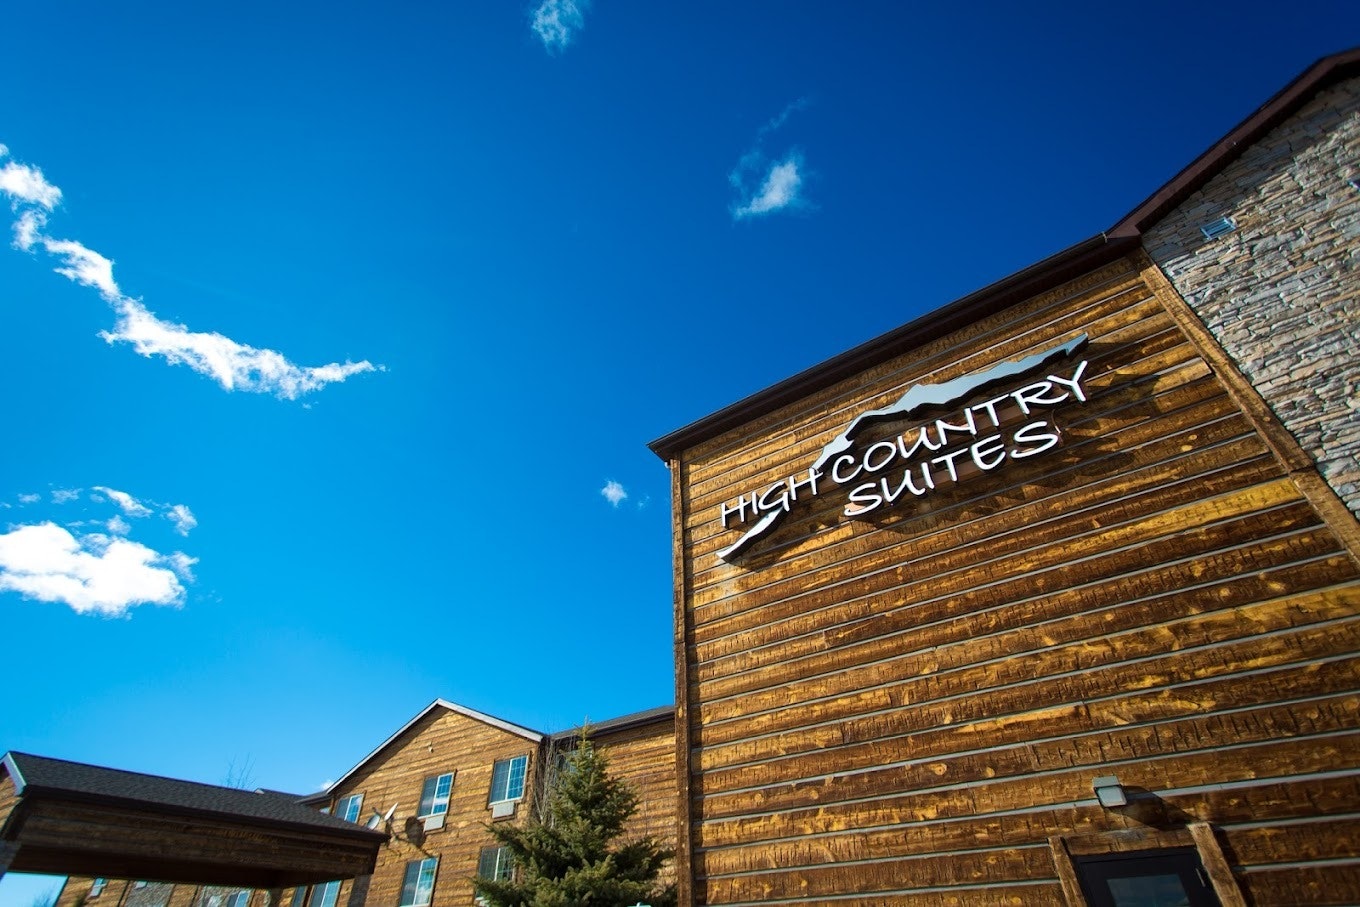 High Country Suites in Pinedale, Wyoming (via Google)